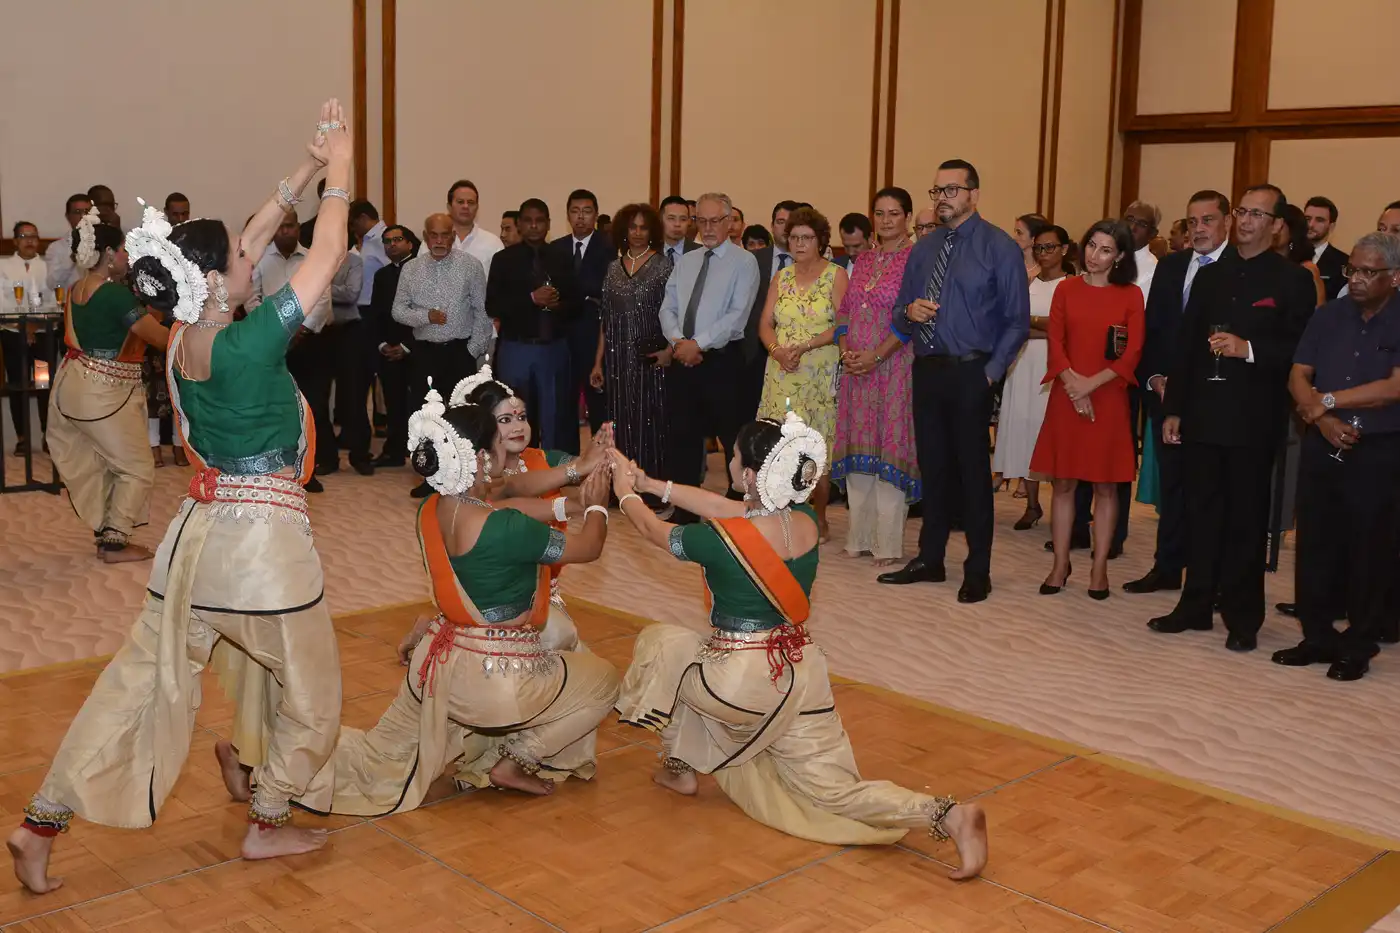 A National Day Reception was held at Kempinski Seychelles Resort today to celebrate the 74th Republic Day of India.